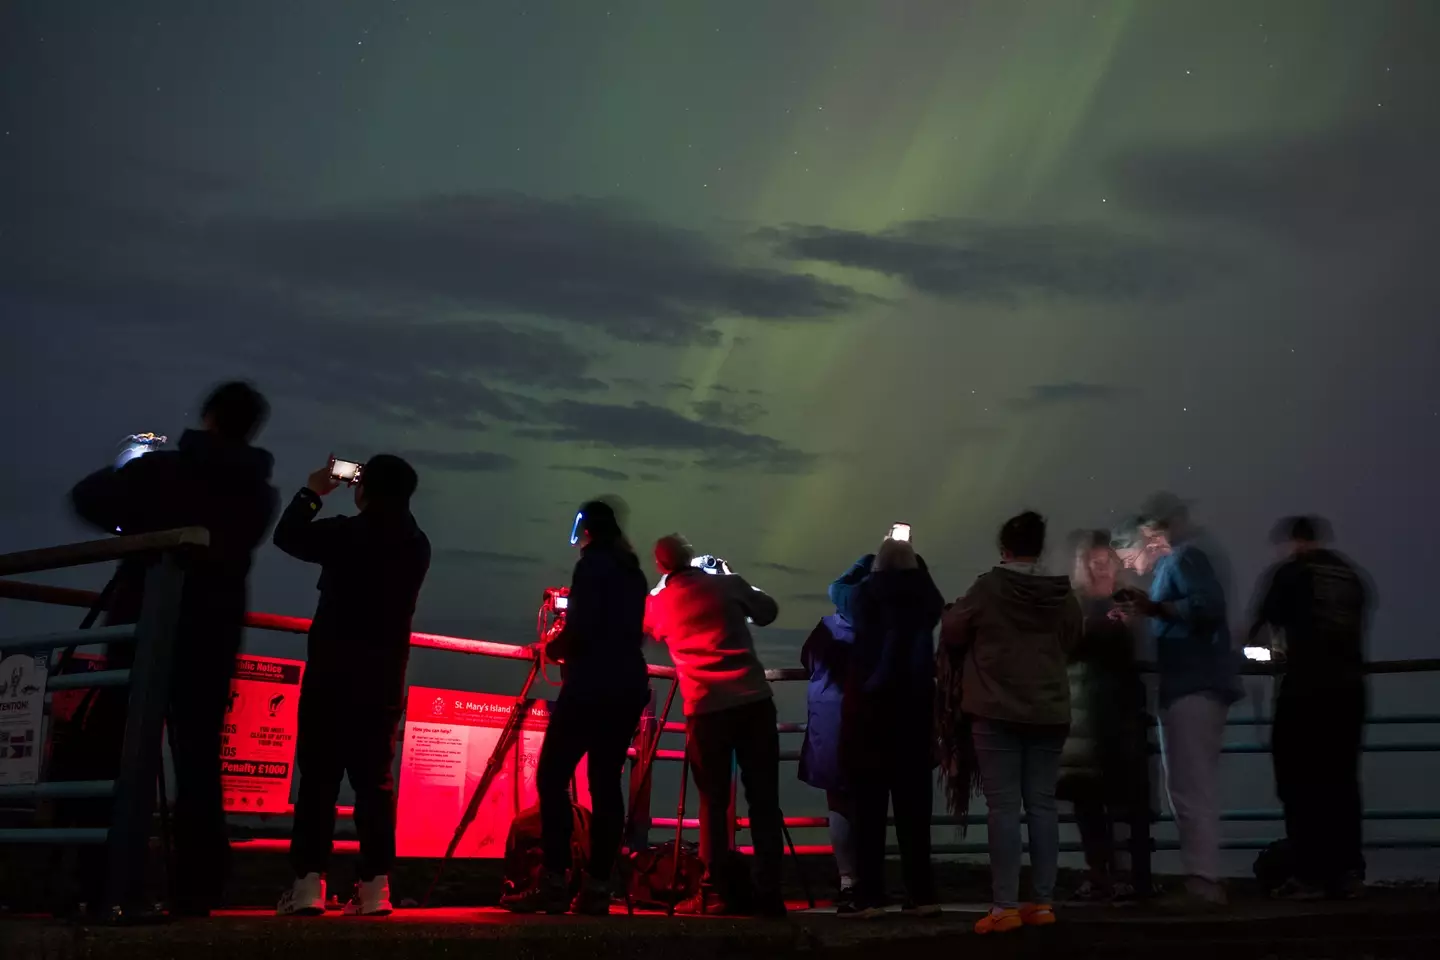 People trying to capture the Northern Lights in Whitley Bay, near Newcastle, last weekend. (Ian Forsyth/Getty Images)